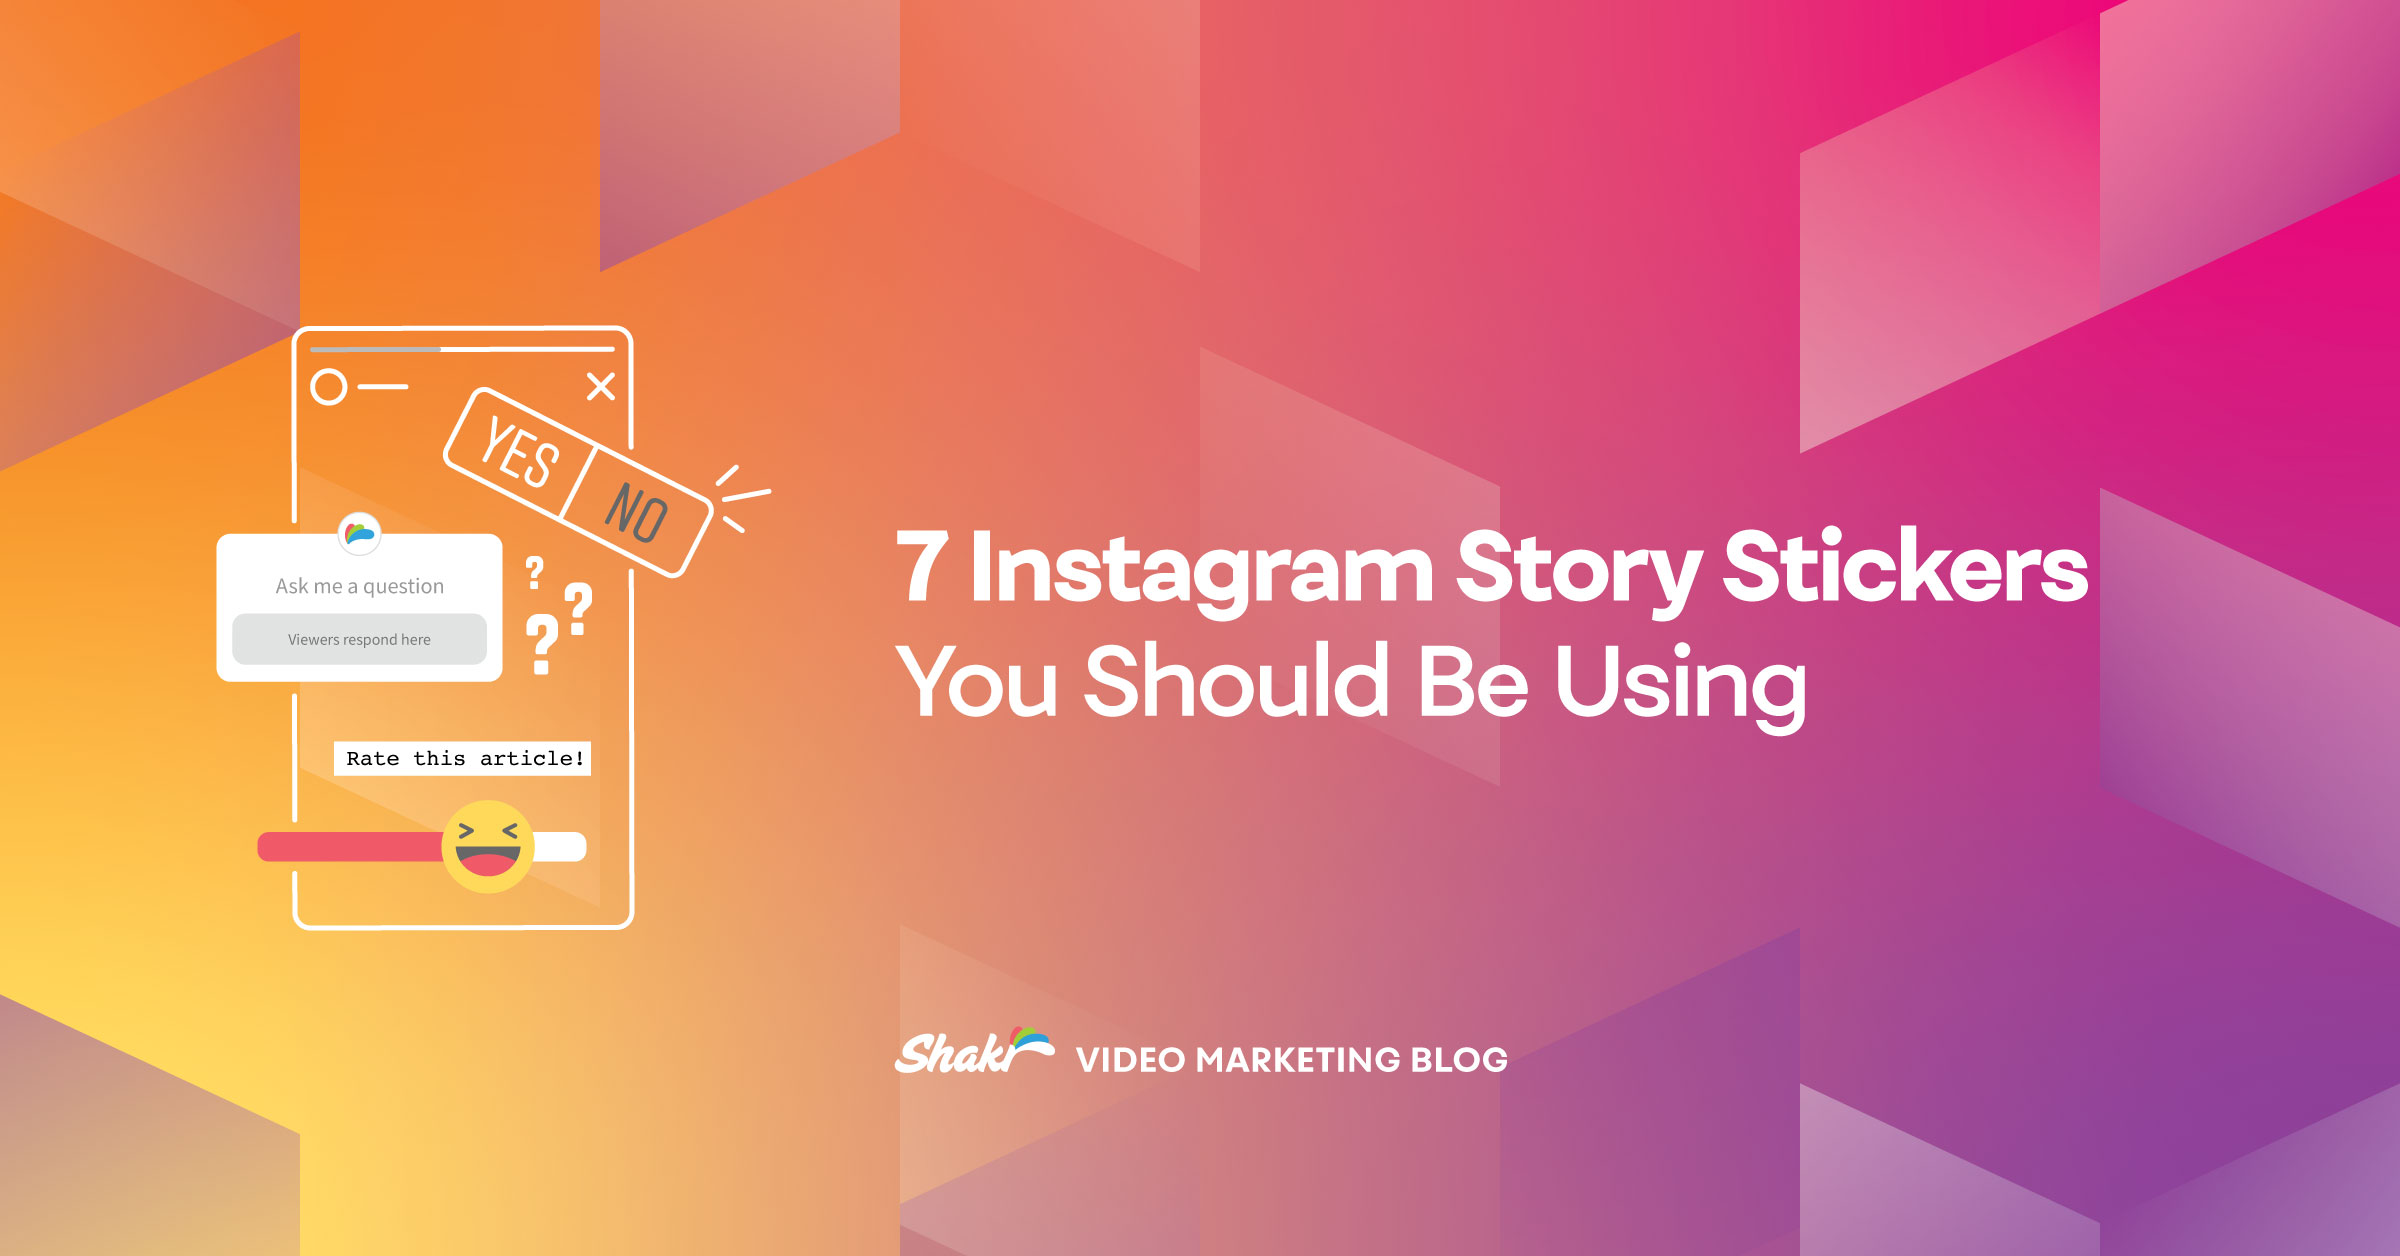 7 Instagram Story Stickers You Should Be Using - Shakr Blog